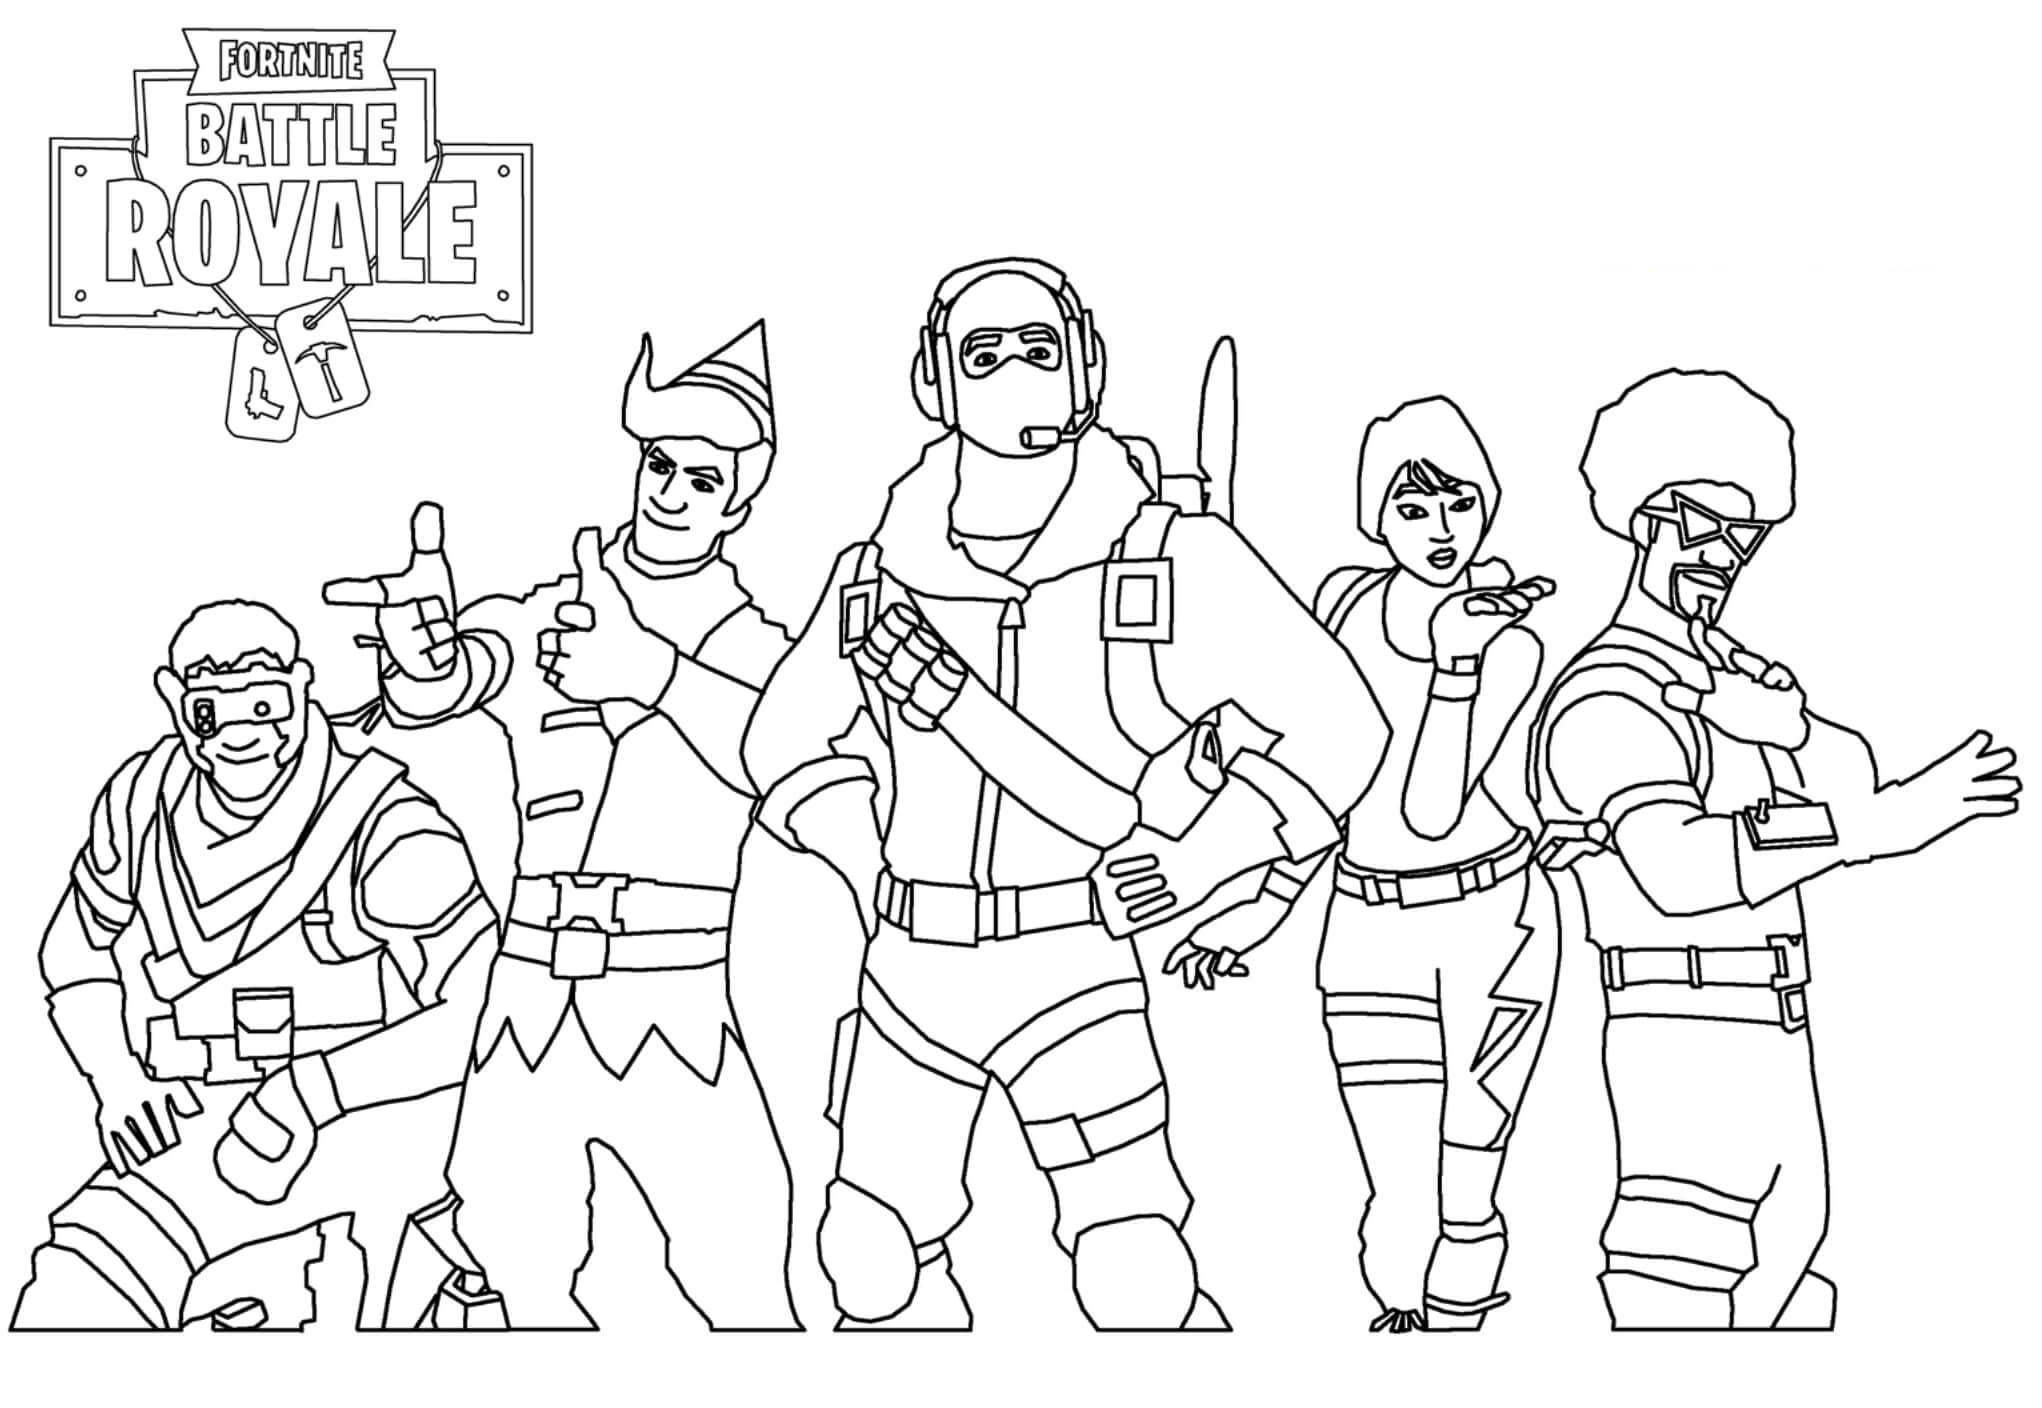 Download Easy Fortnite Skin Coloring Pages Skins Drawing Pictures - Free Printable Coloring Pages